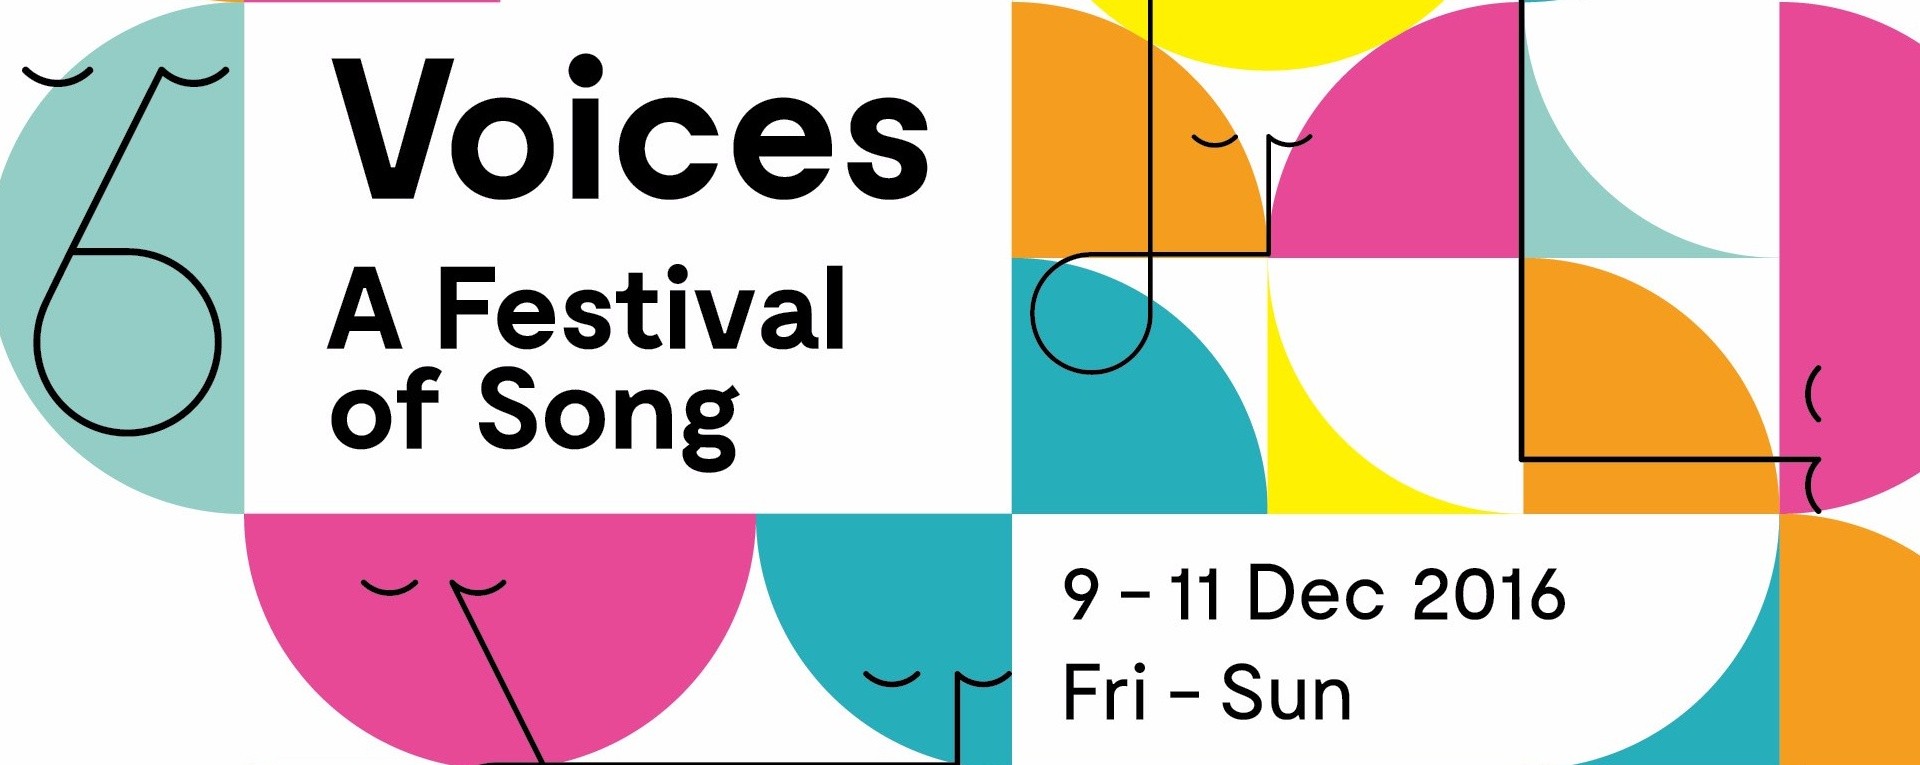 Voices - A Festival of Song 2016